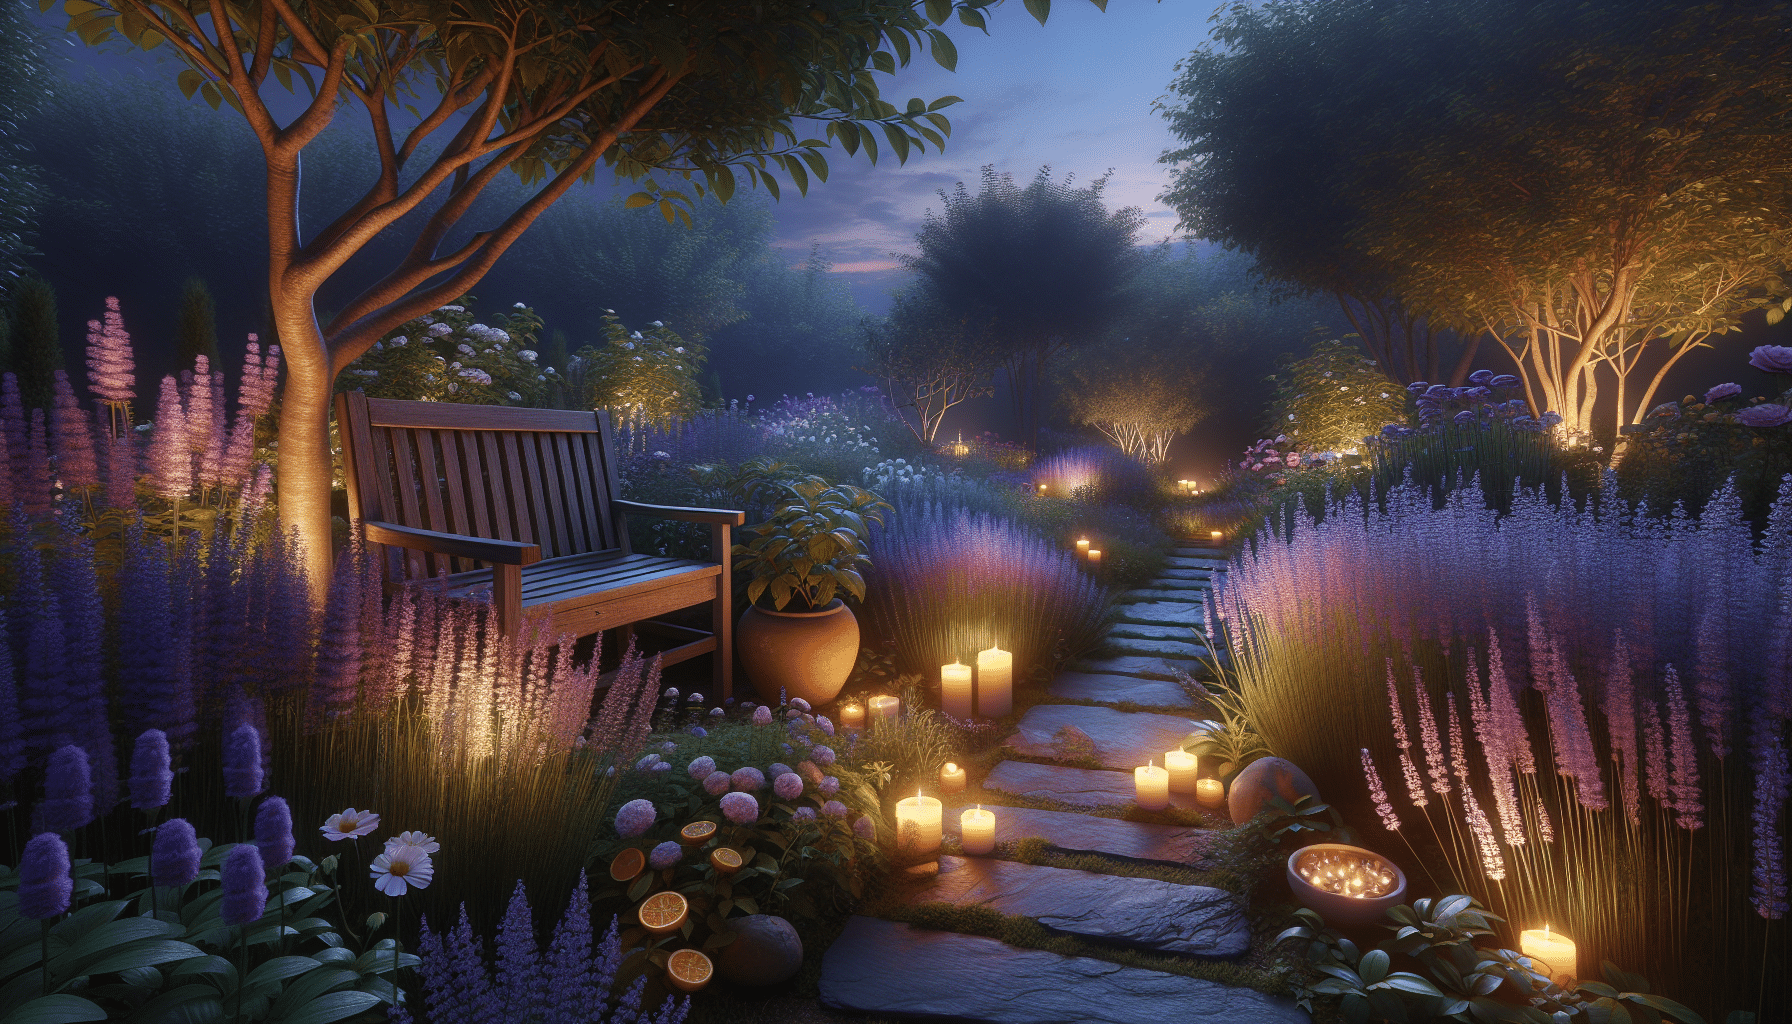 Tranquil twilight garden with blooming flowers and serene pond